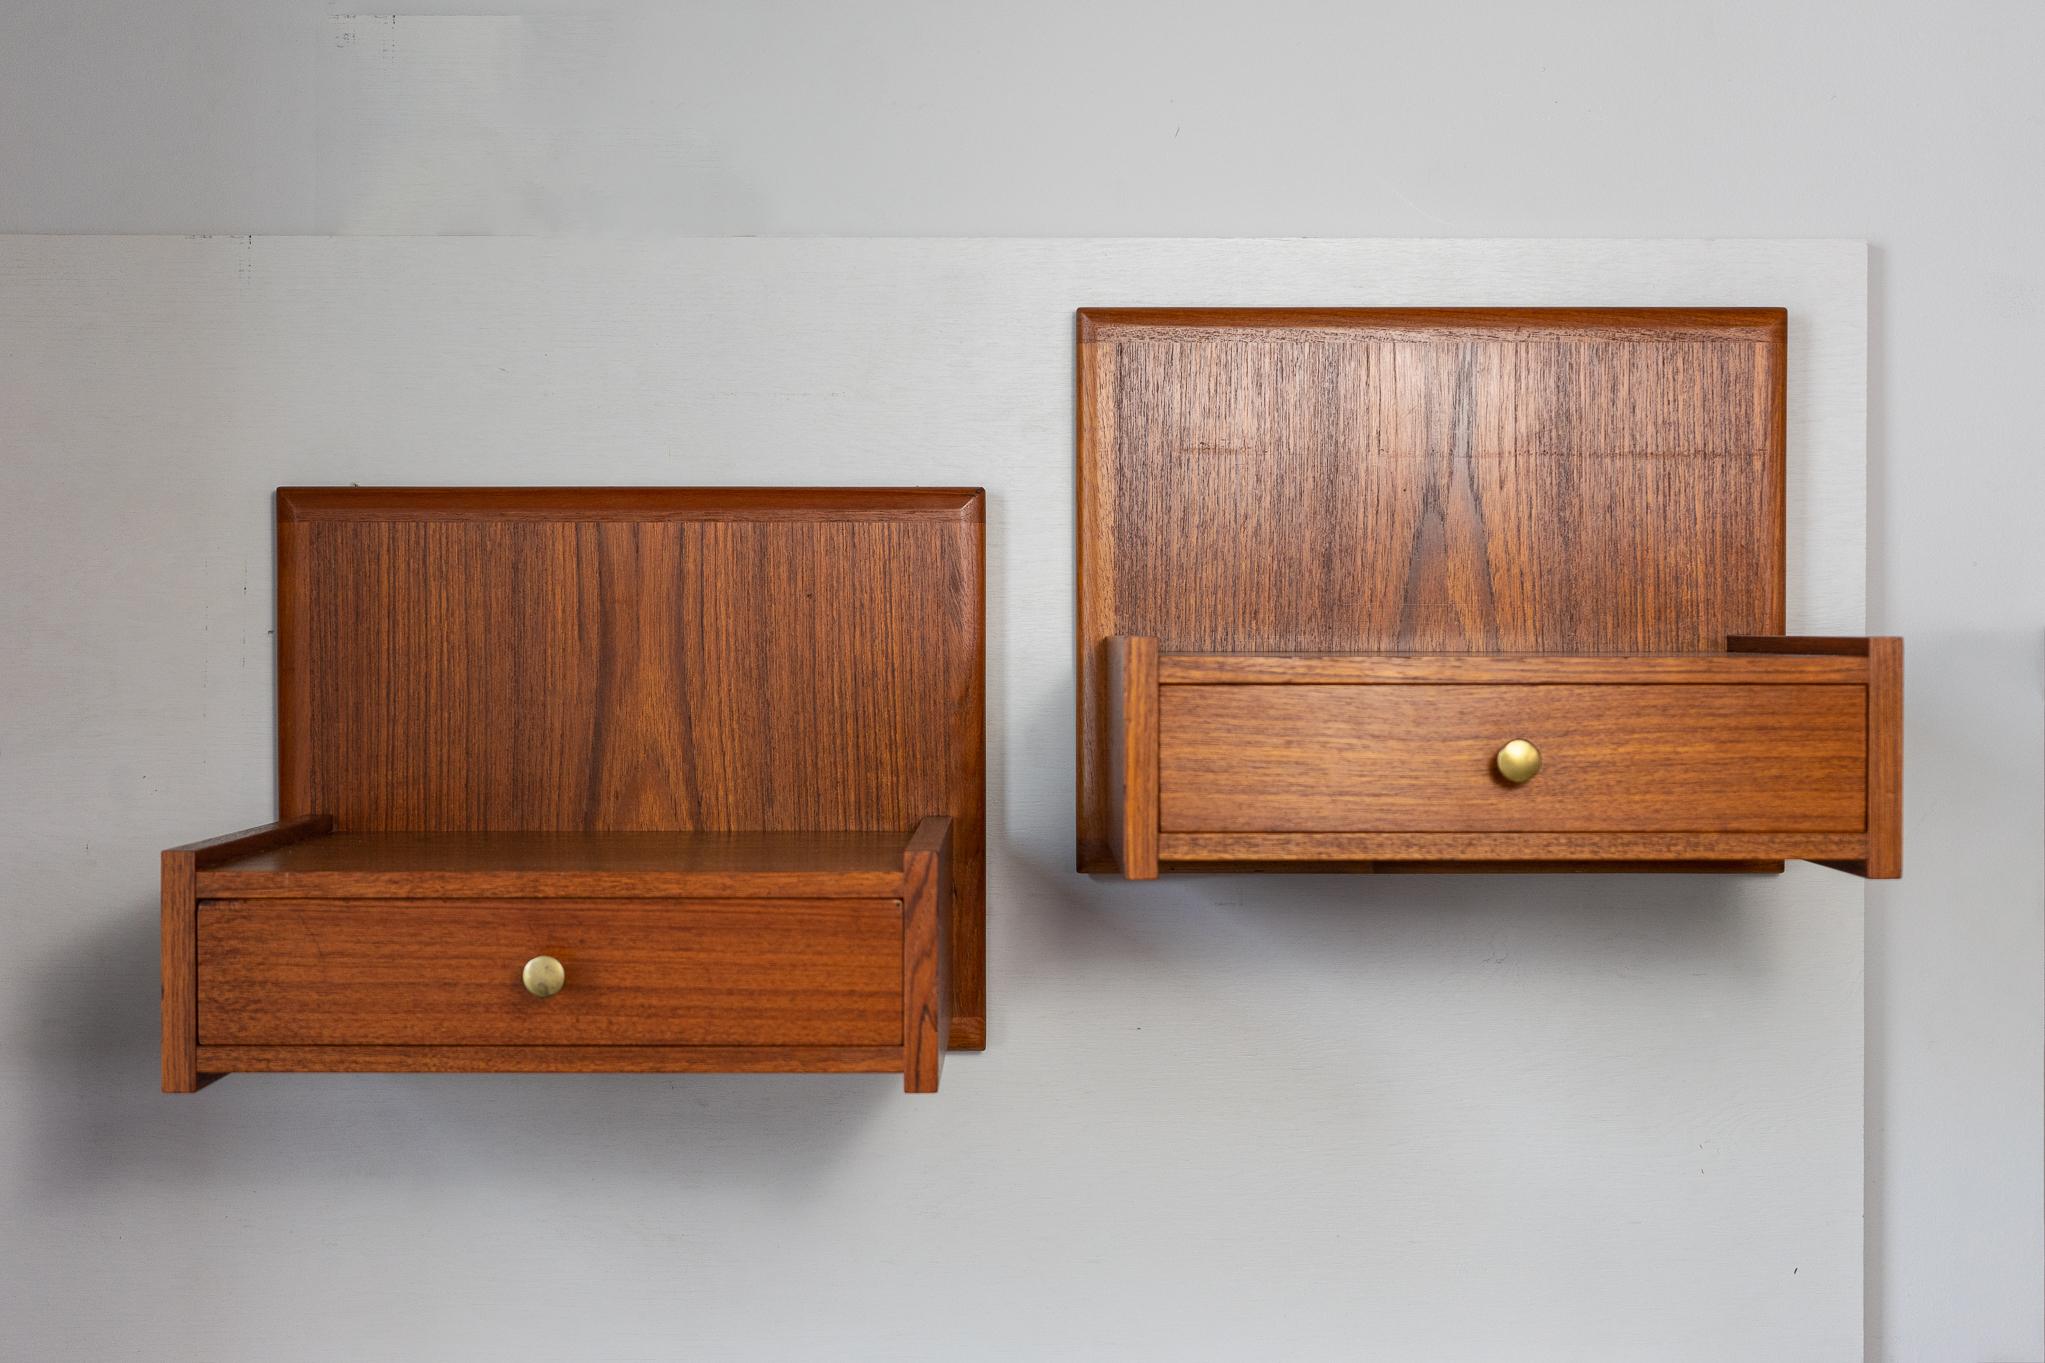 Teak Danish modern floating bedside tables, circa 1960's. Slim, sleek drawers offer storage for small items, top surface can support a nice lamp. Solid wood framing surrounds expertly matched veneer on the top and sides. Would also make excellent